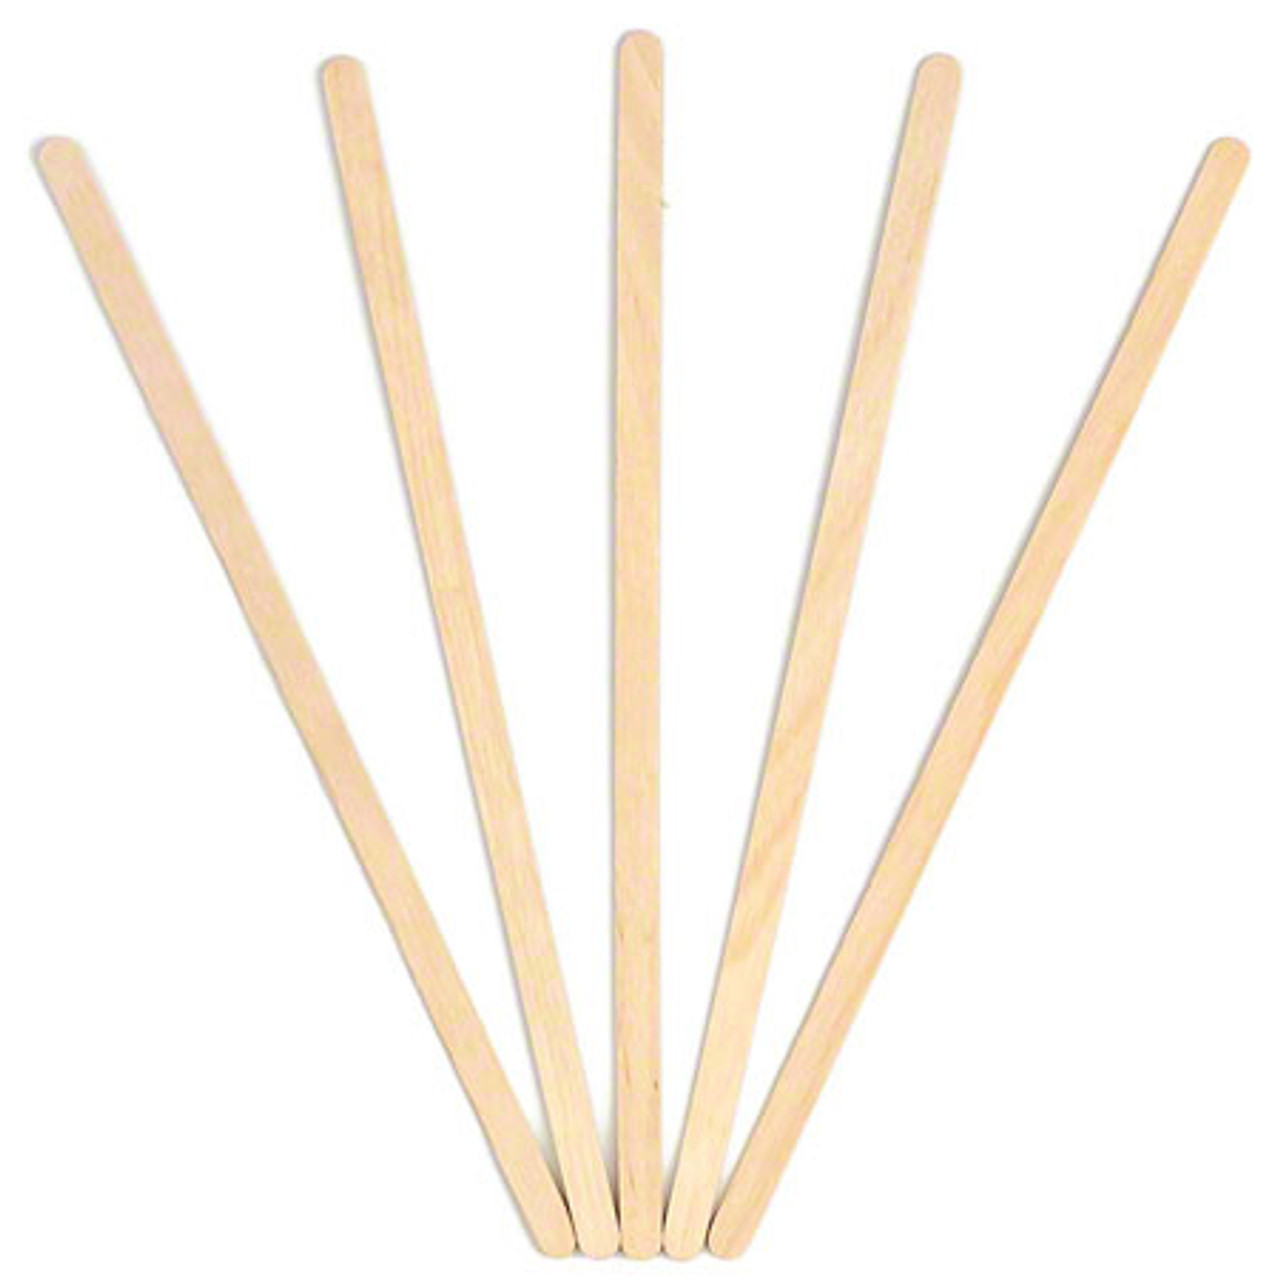 Callico 316 Wood Coffee Stirrers - 10 boxes of 1,000